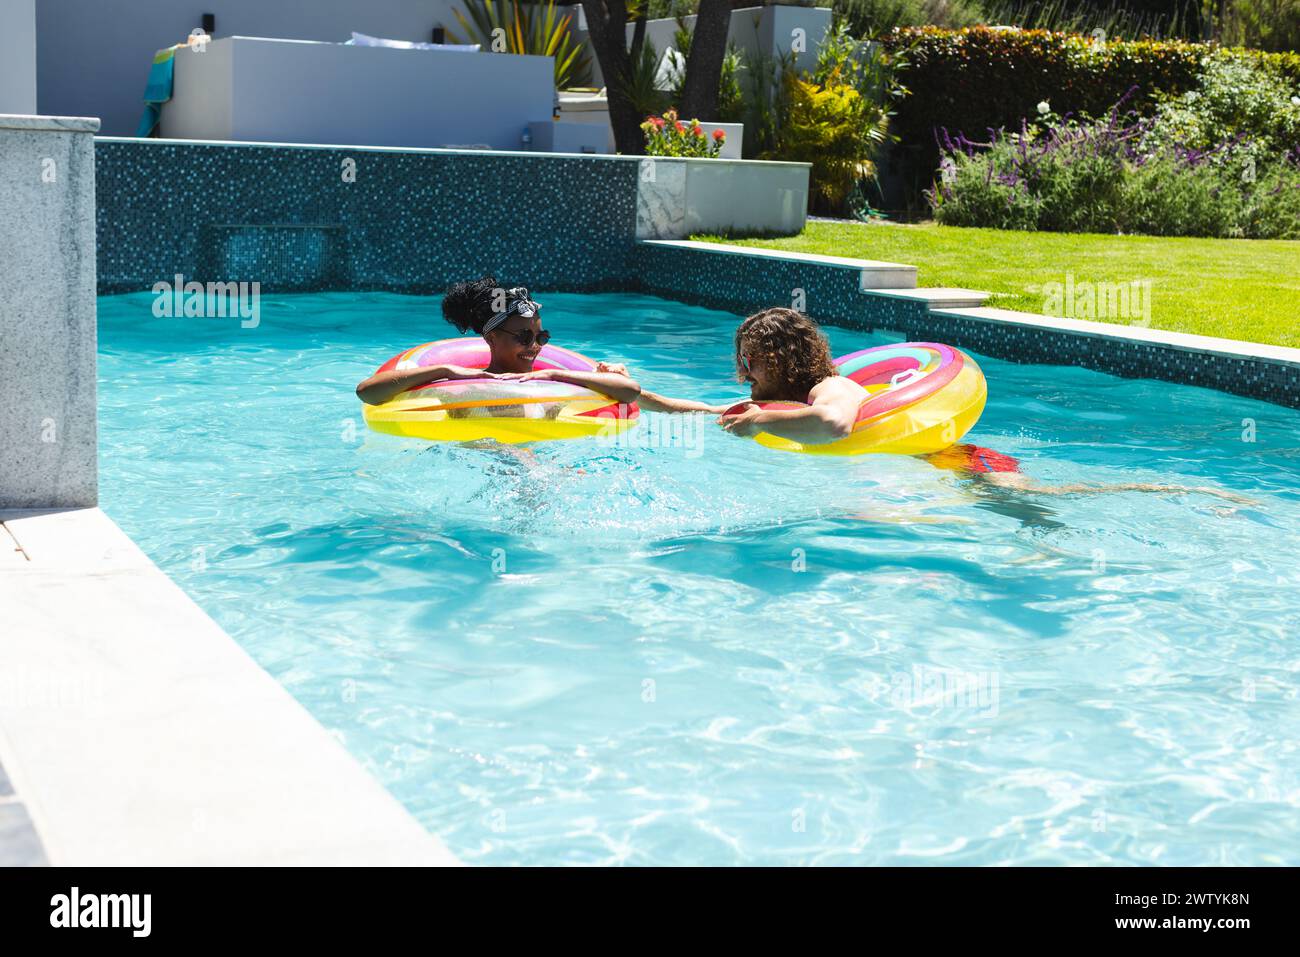 A diverse couple enjoys a sunny pool day at home, floating on colorful rings with copy space Stock Photo